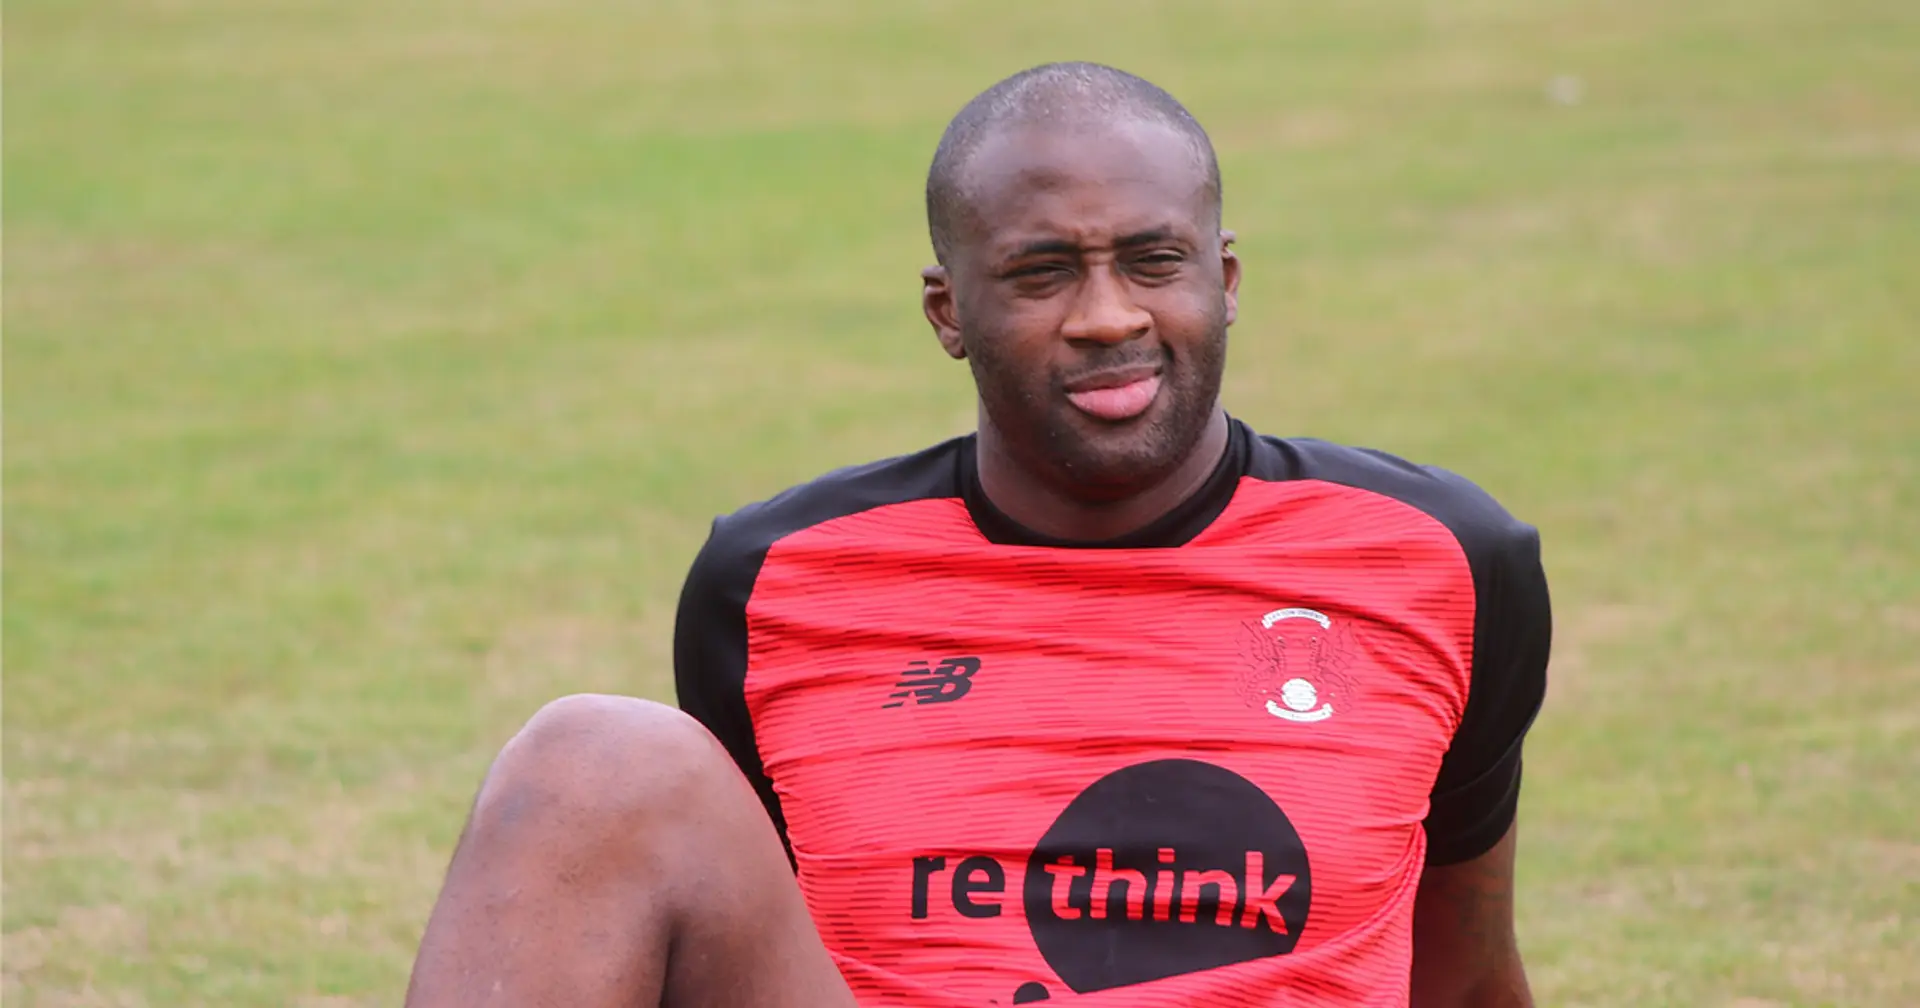 The Telegraph: Leyton Orient keen to sign Yaya Toure as ex-Man City star trains with League Two side to stay fit